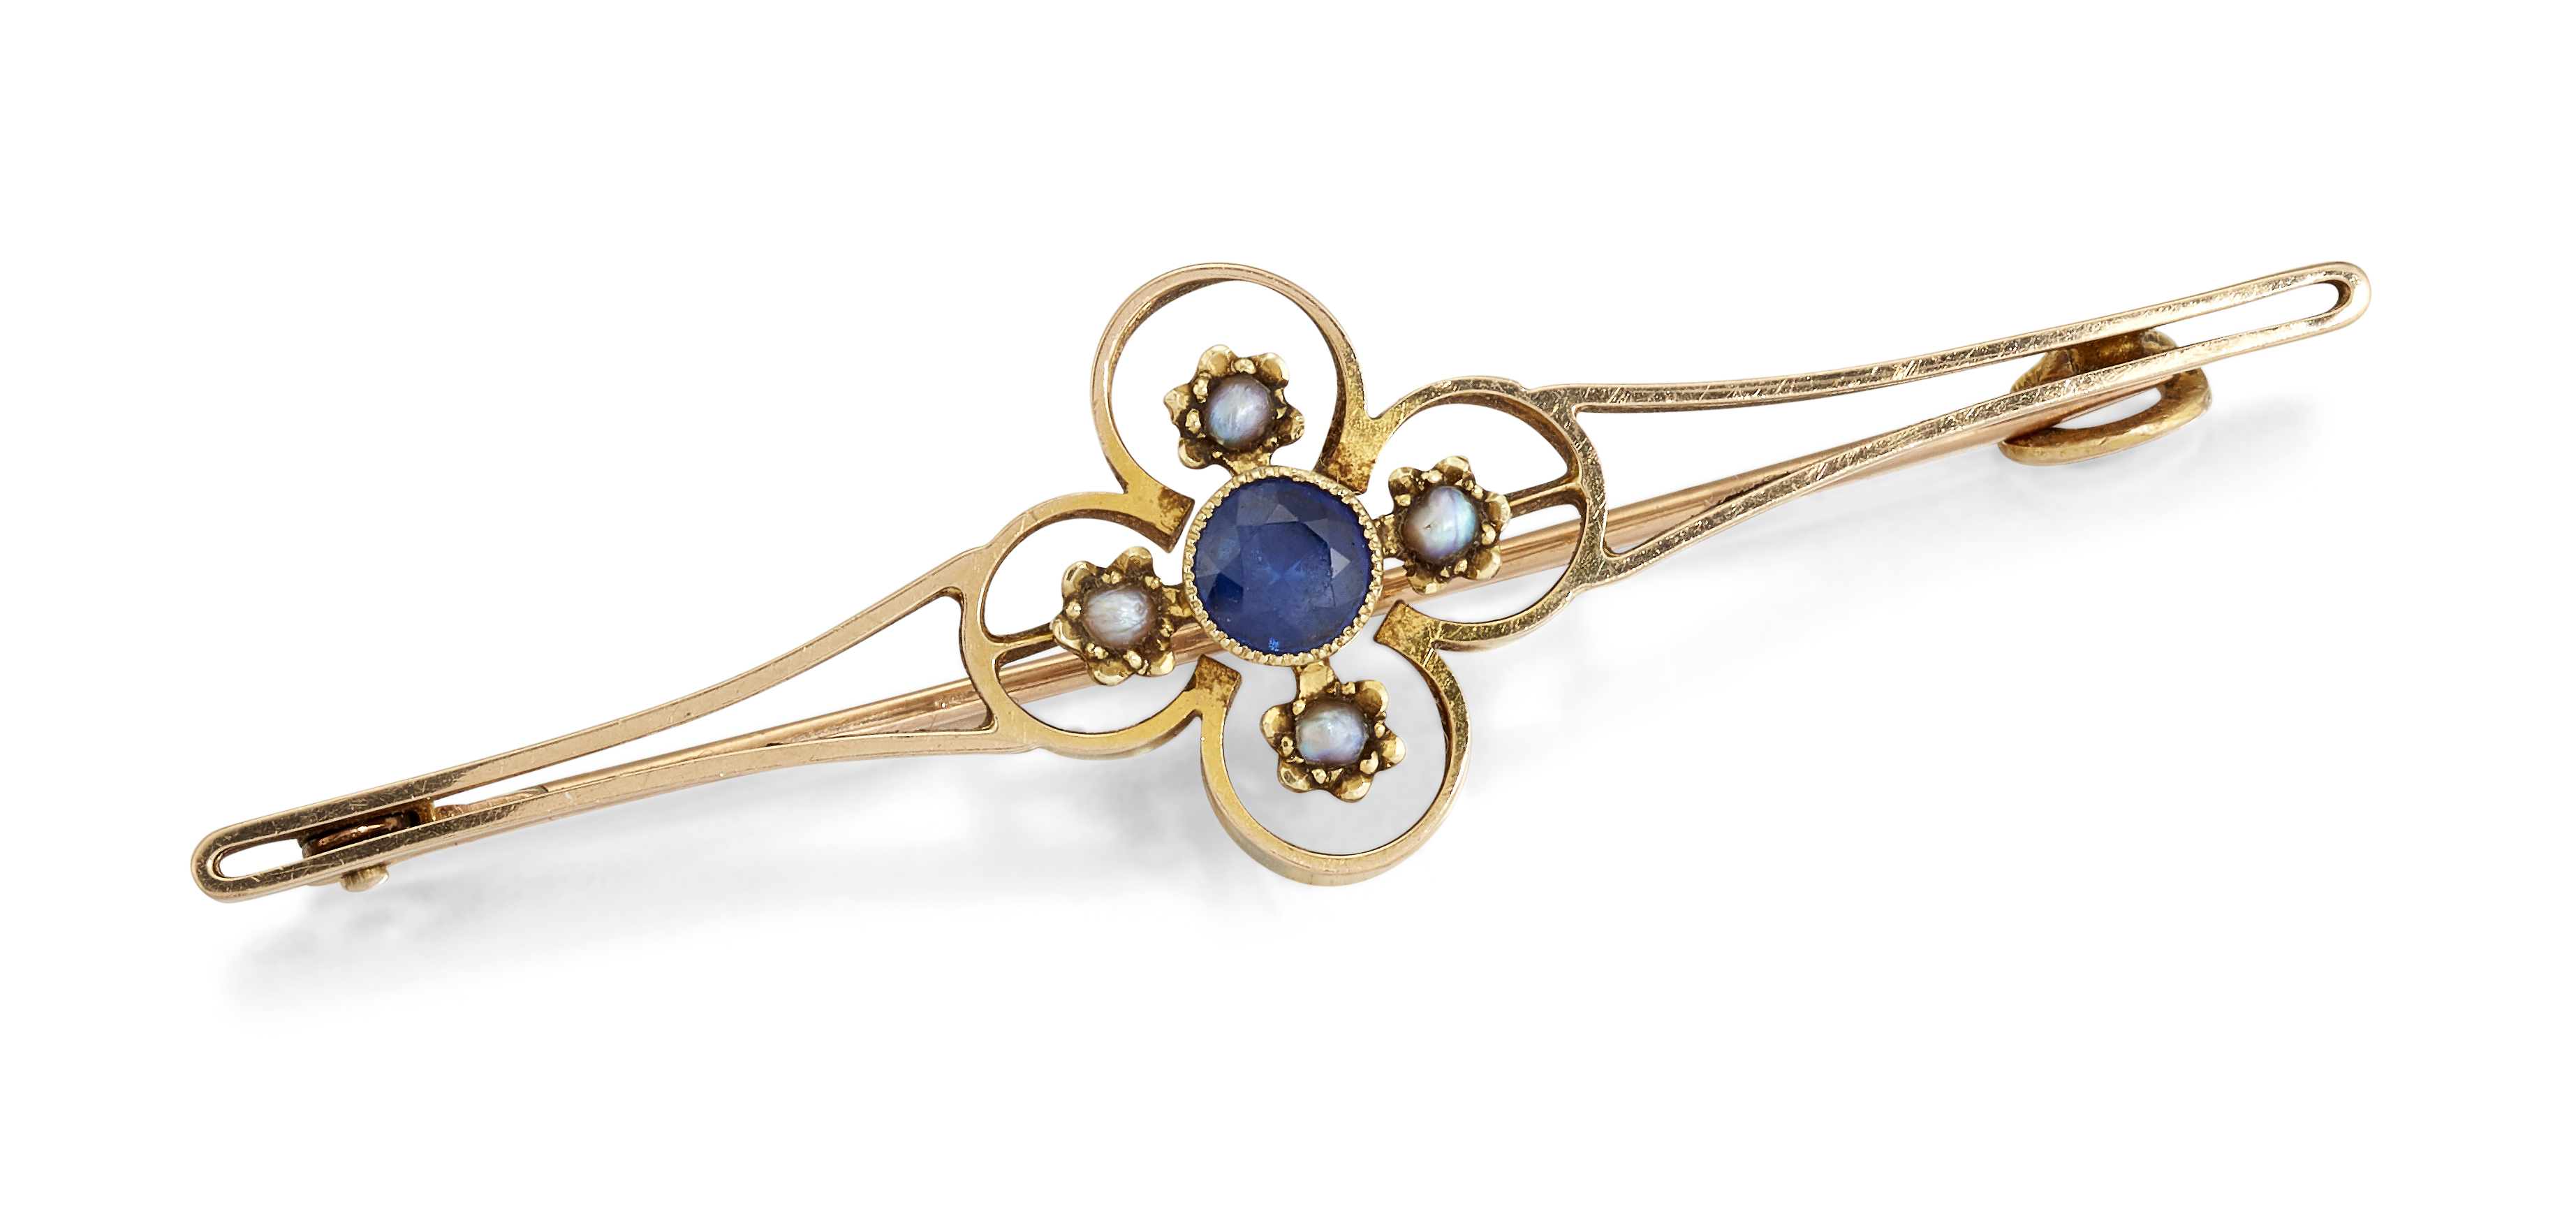 A 15CT SAPPHIRE AND SEED PEARL BAR BROOCH,